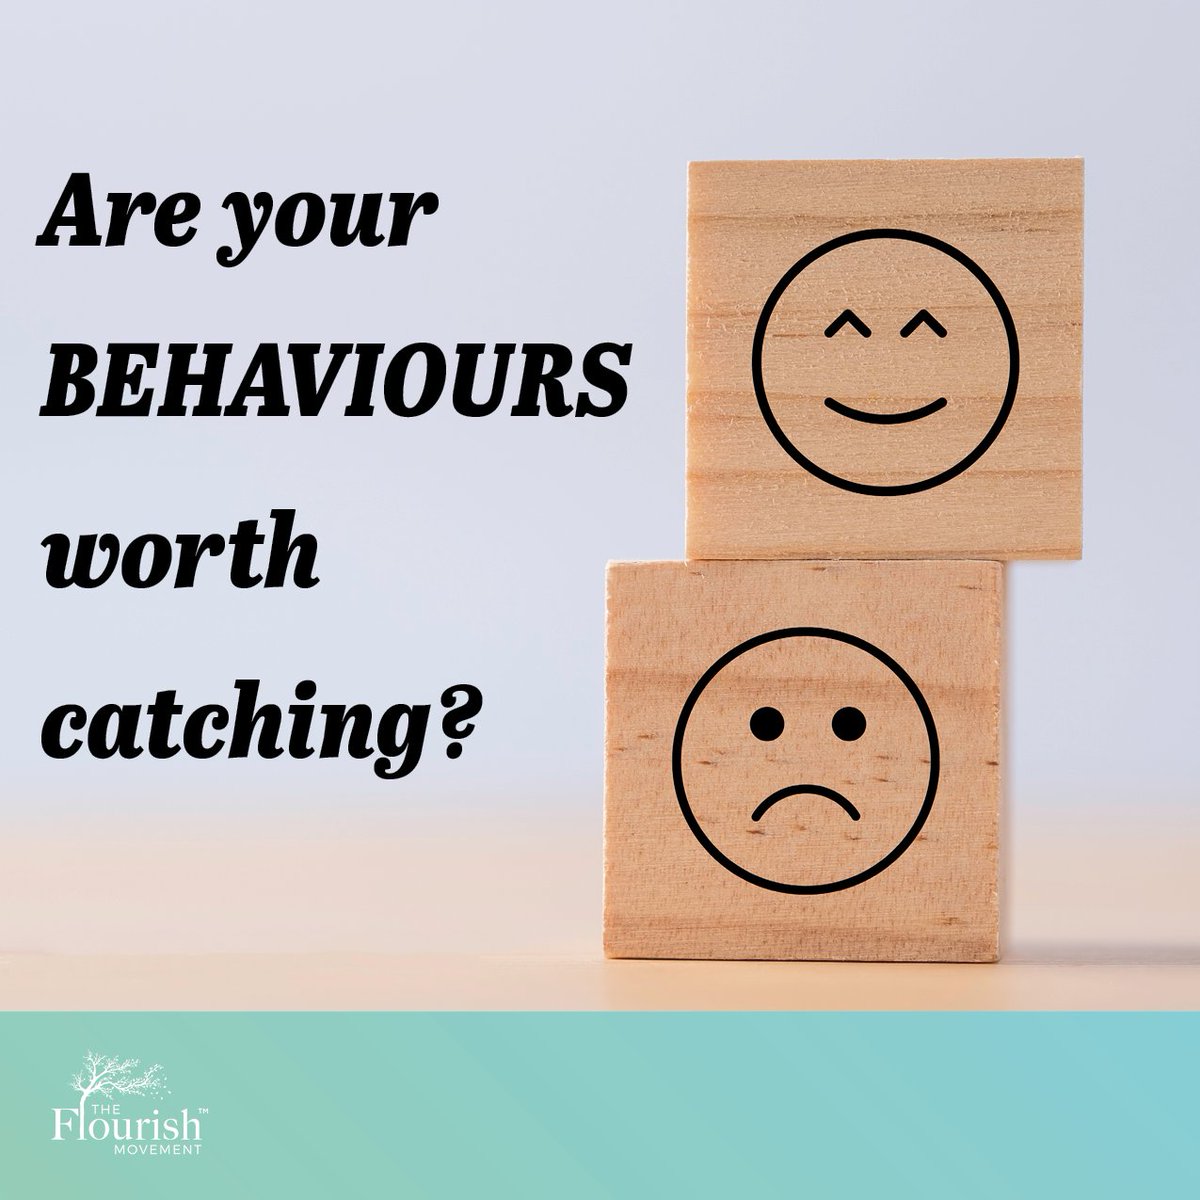 In the workplace, there is no such thing as a trivial behaviour. Every behaviour is contagious. Are your behaviours worth catching?

#TheFlourishMovement #TheRippleEffect #Culture #Schools